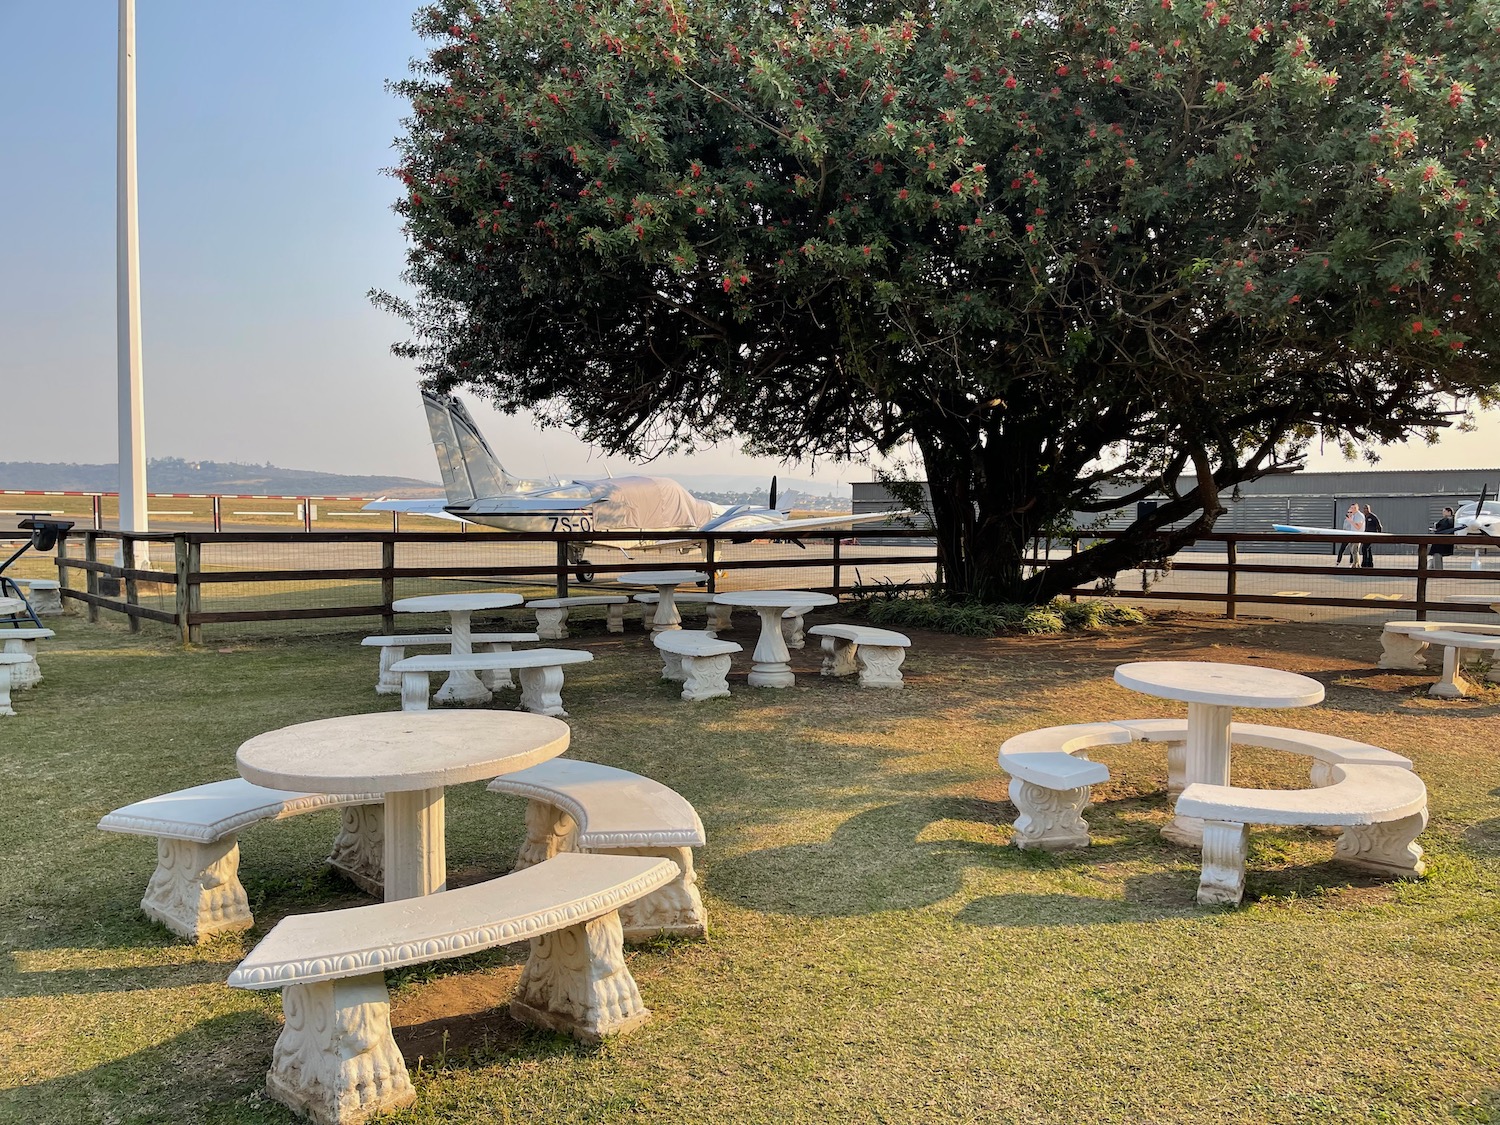 a picnic area with benches and tables in the grass